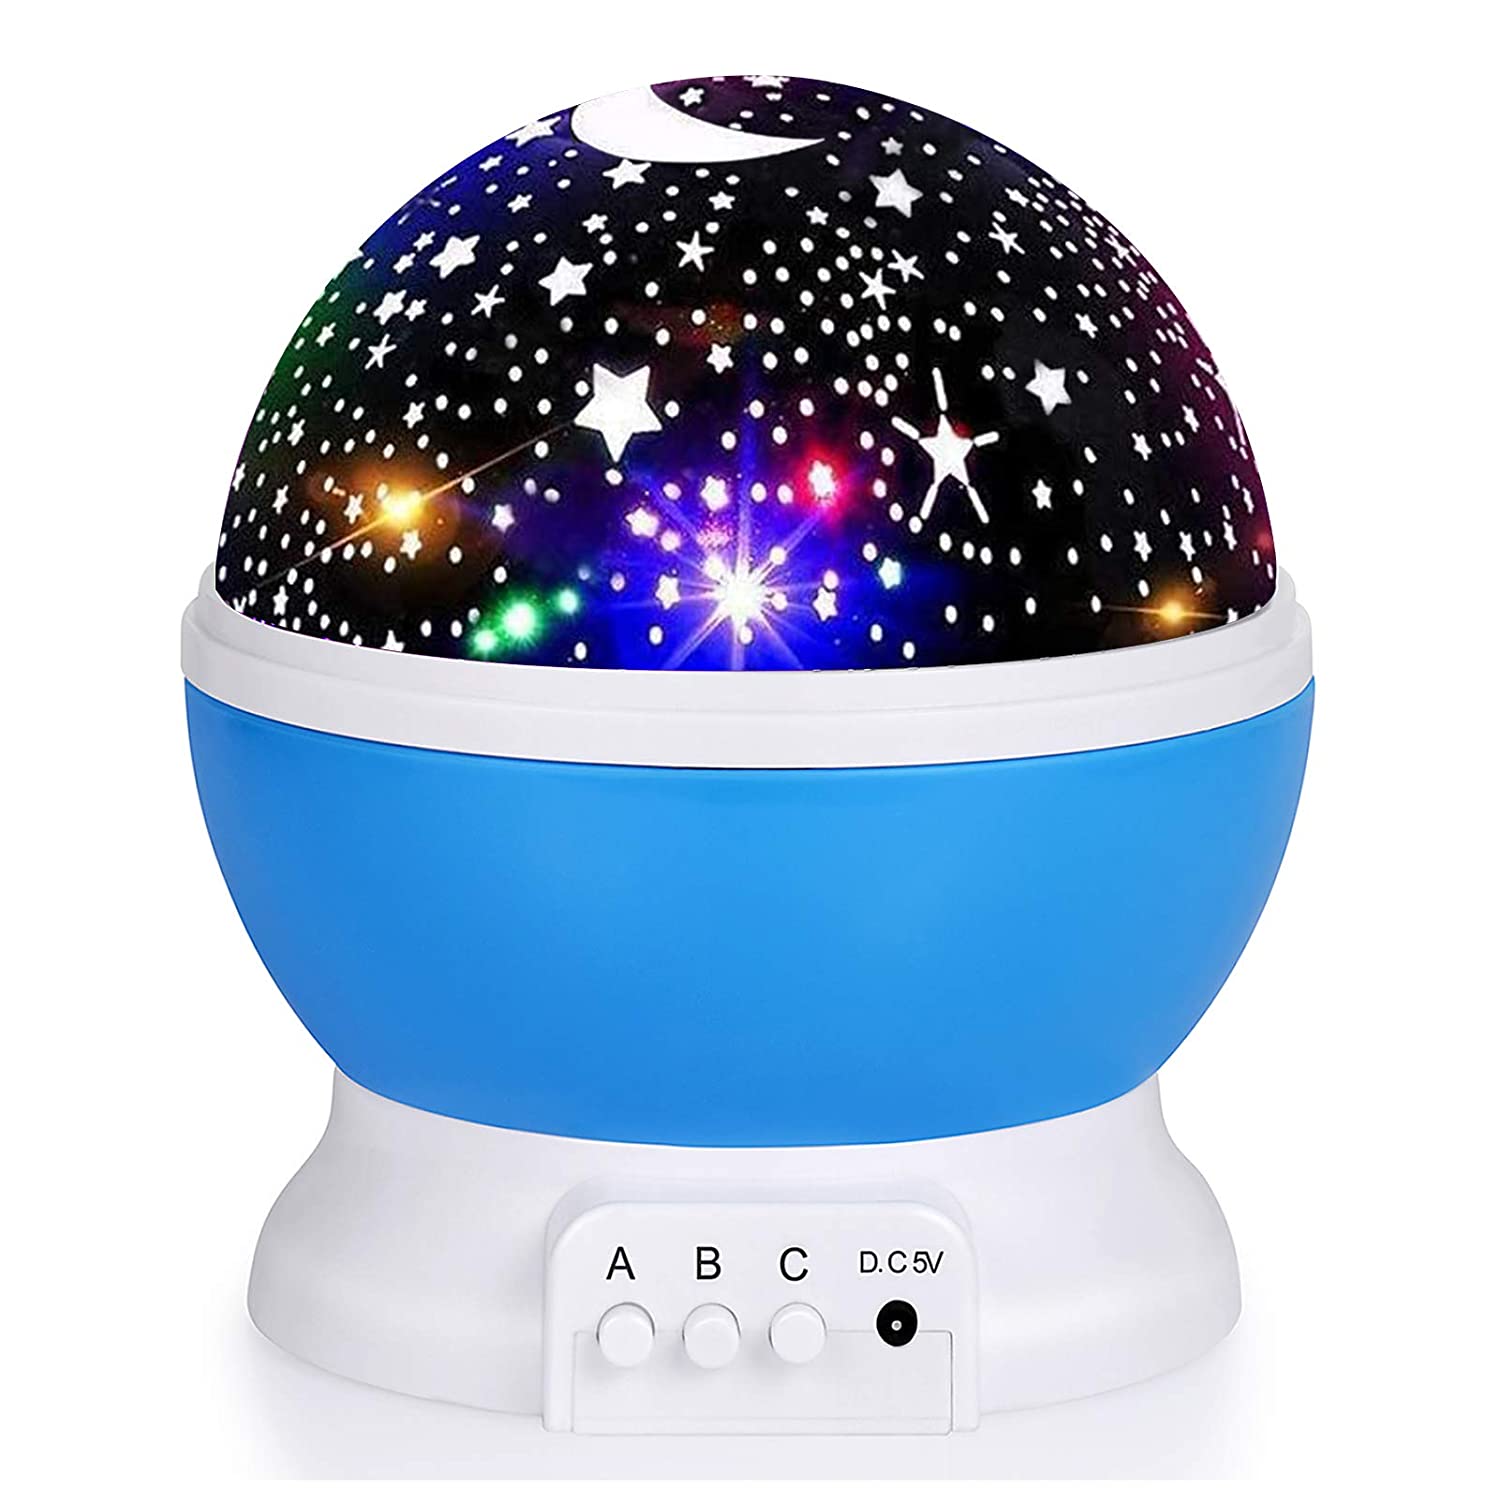 ''Kids Star Night Light, 360-Degree Rotating Star Projector, Desk LAMP 4 LEDs 8 Colors Changing with 